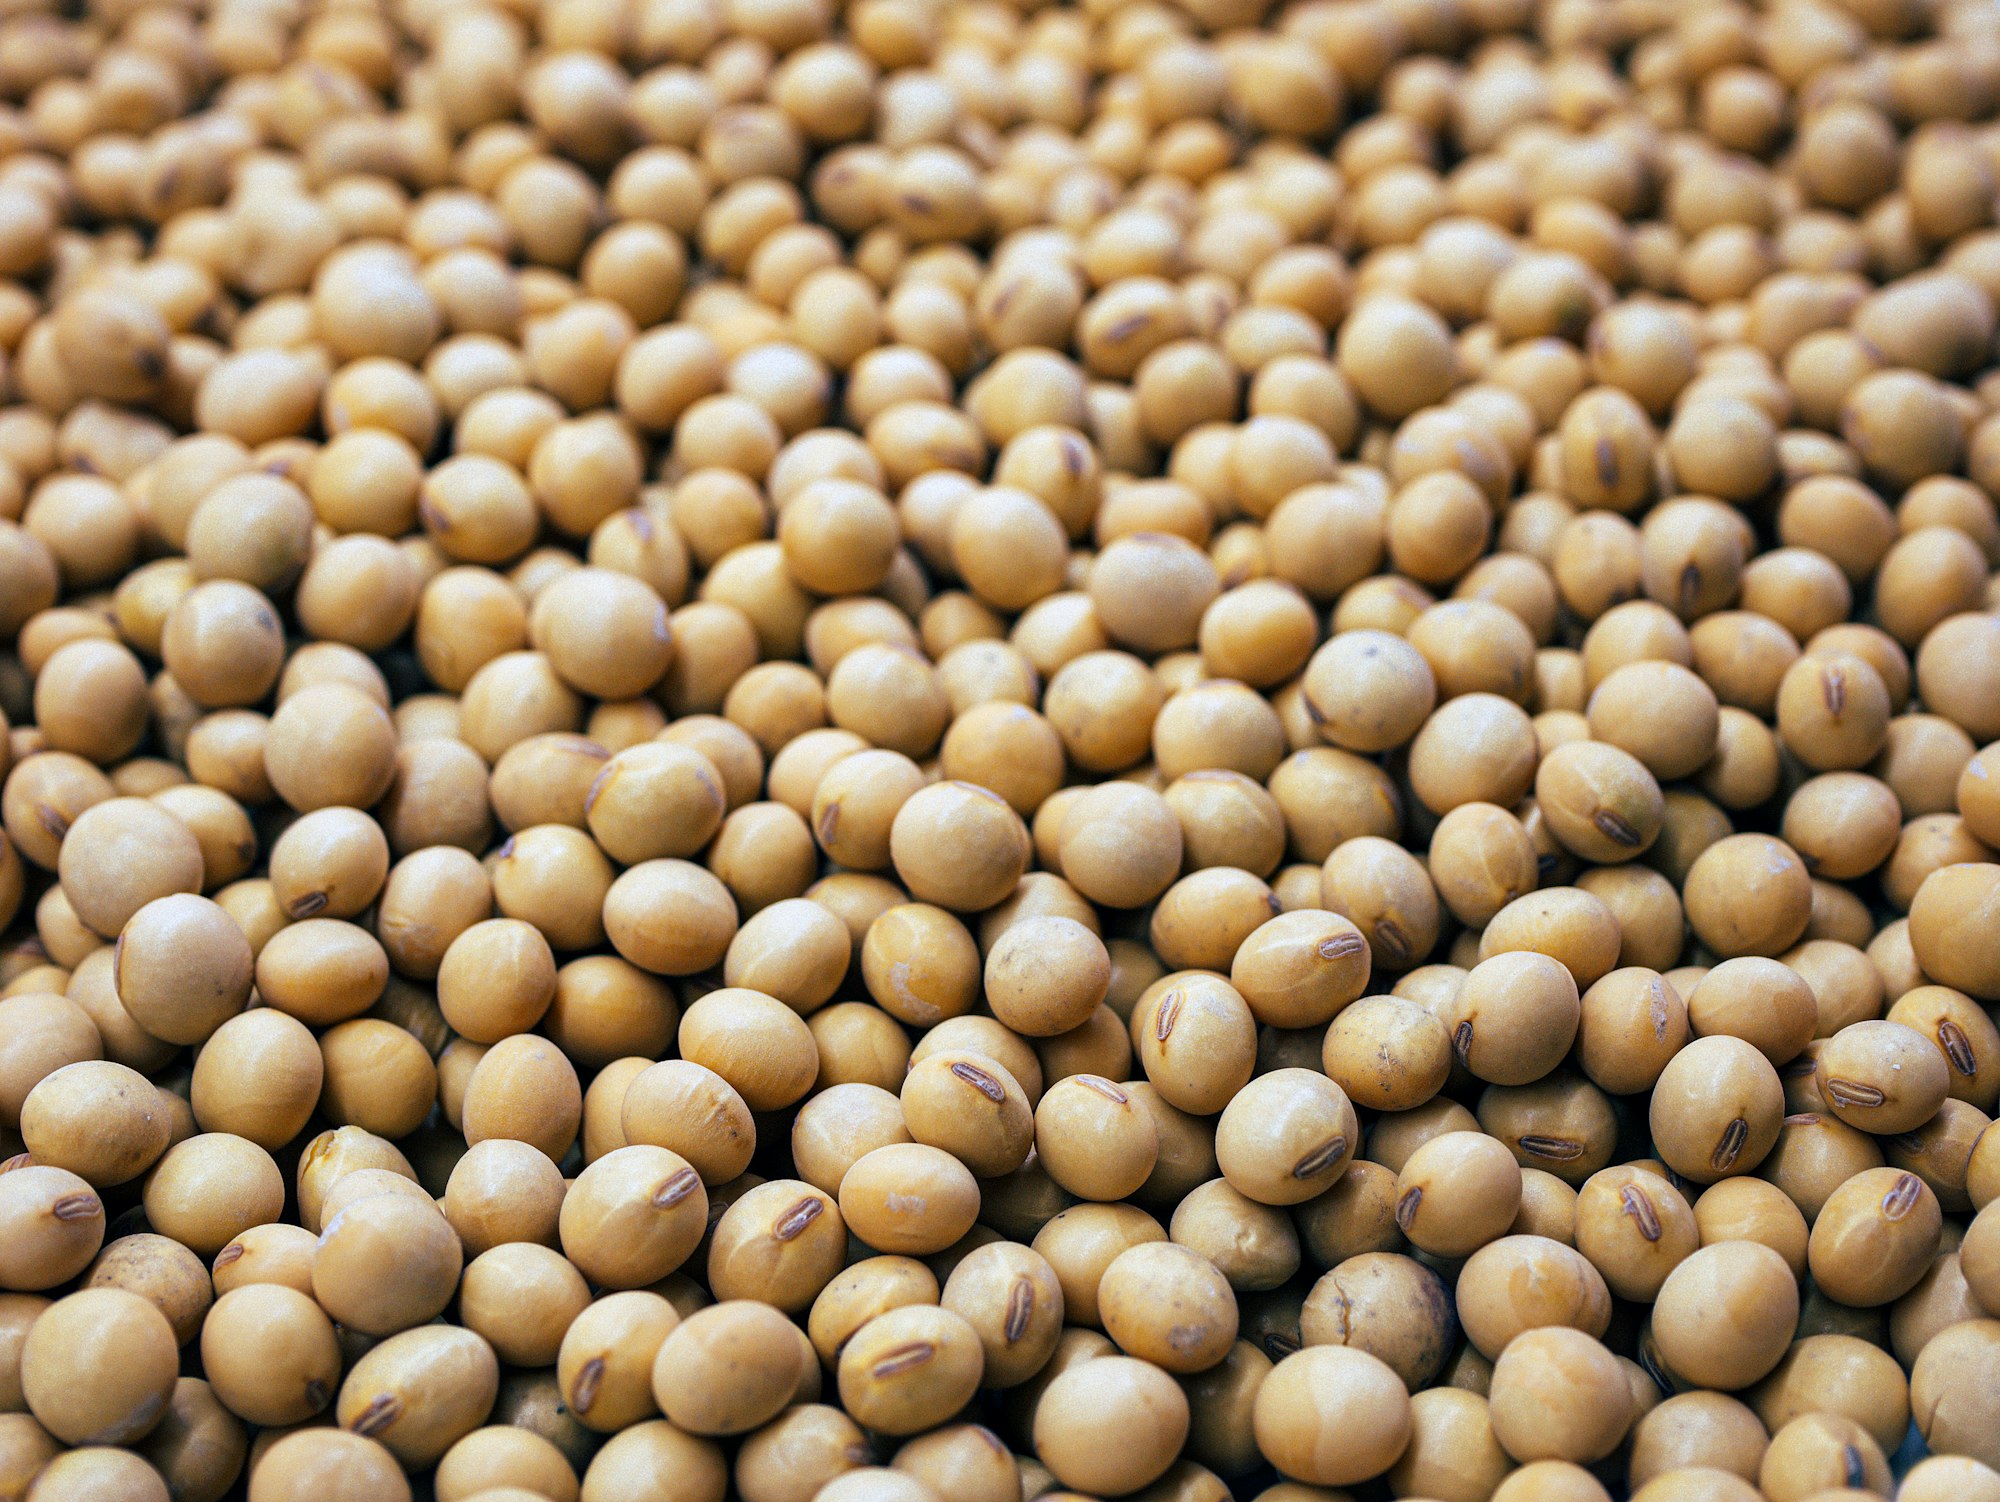 Soybeans 61.8% to 61.8%